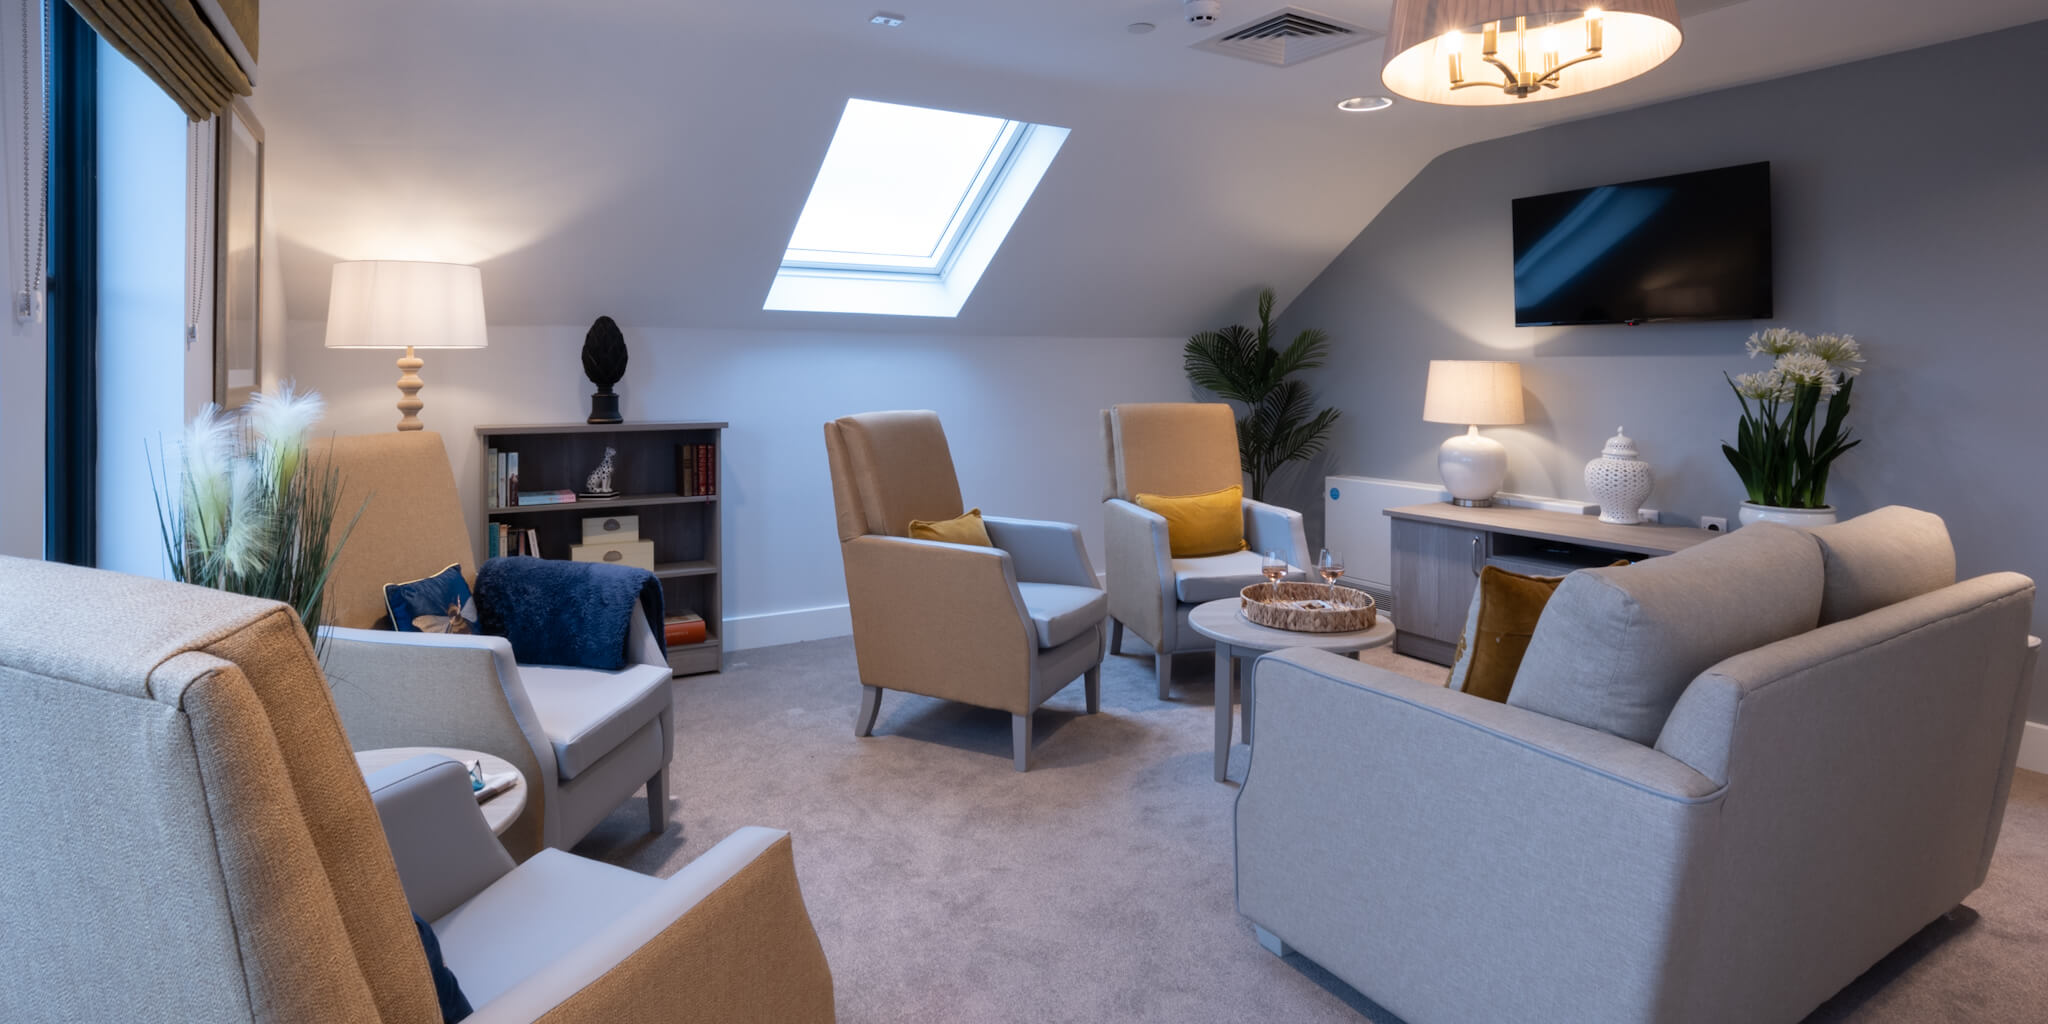 Living Room With Armchairs and TV at Rowan Park Care Home